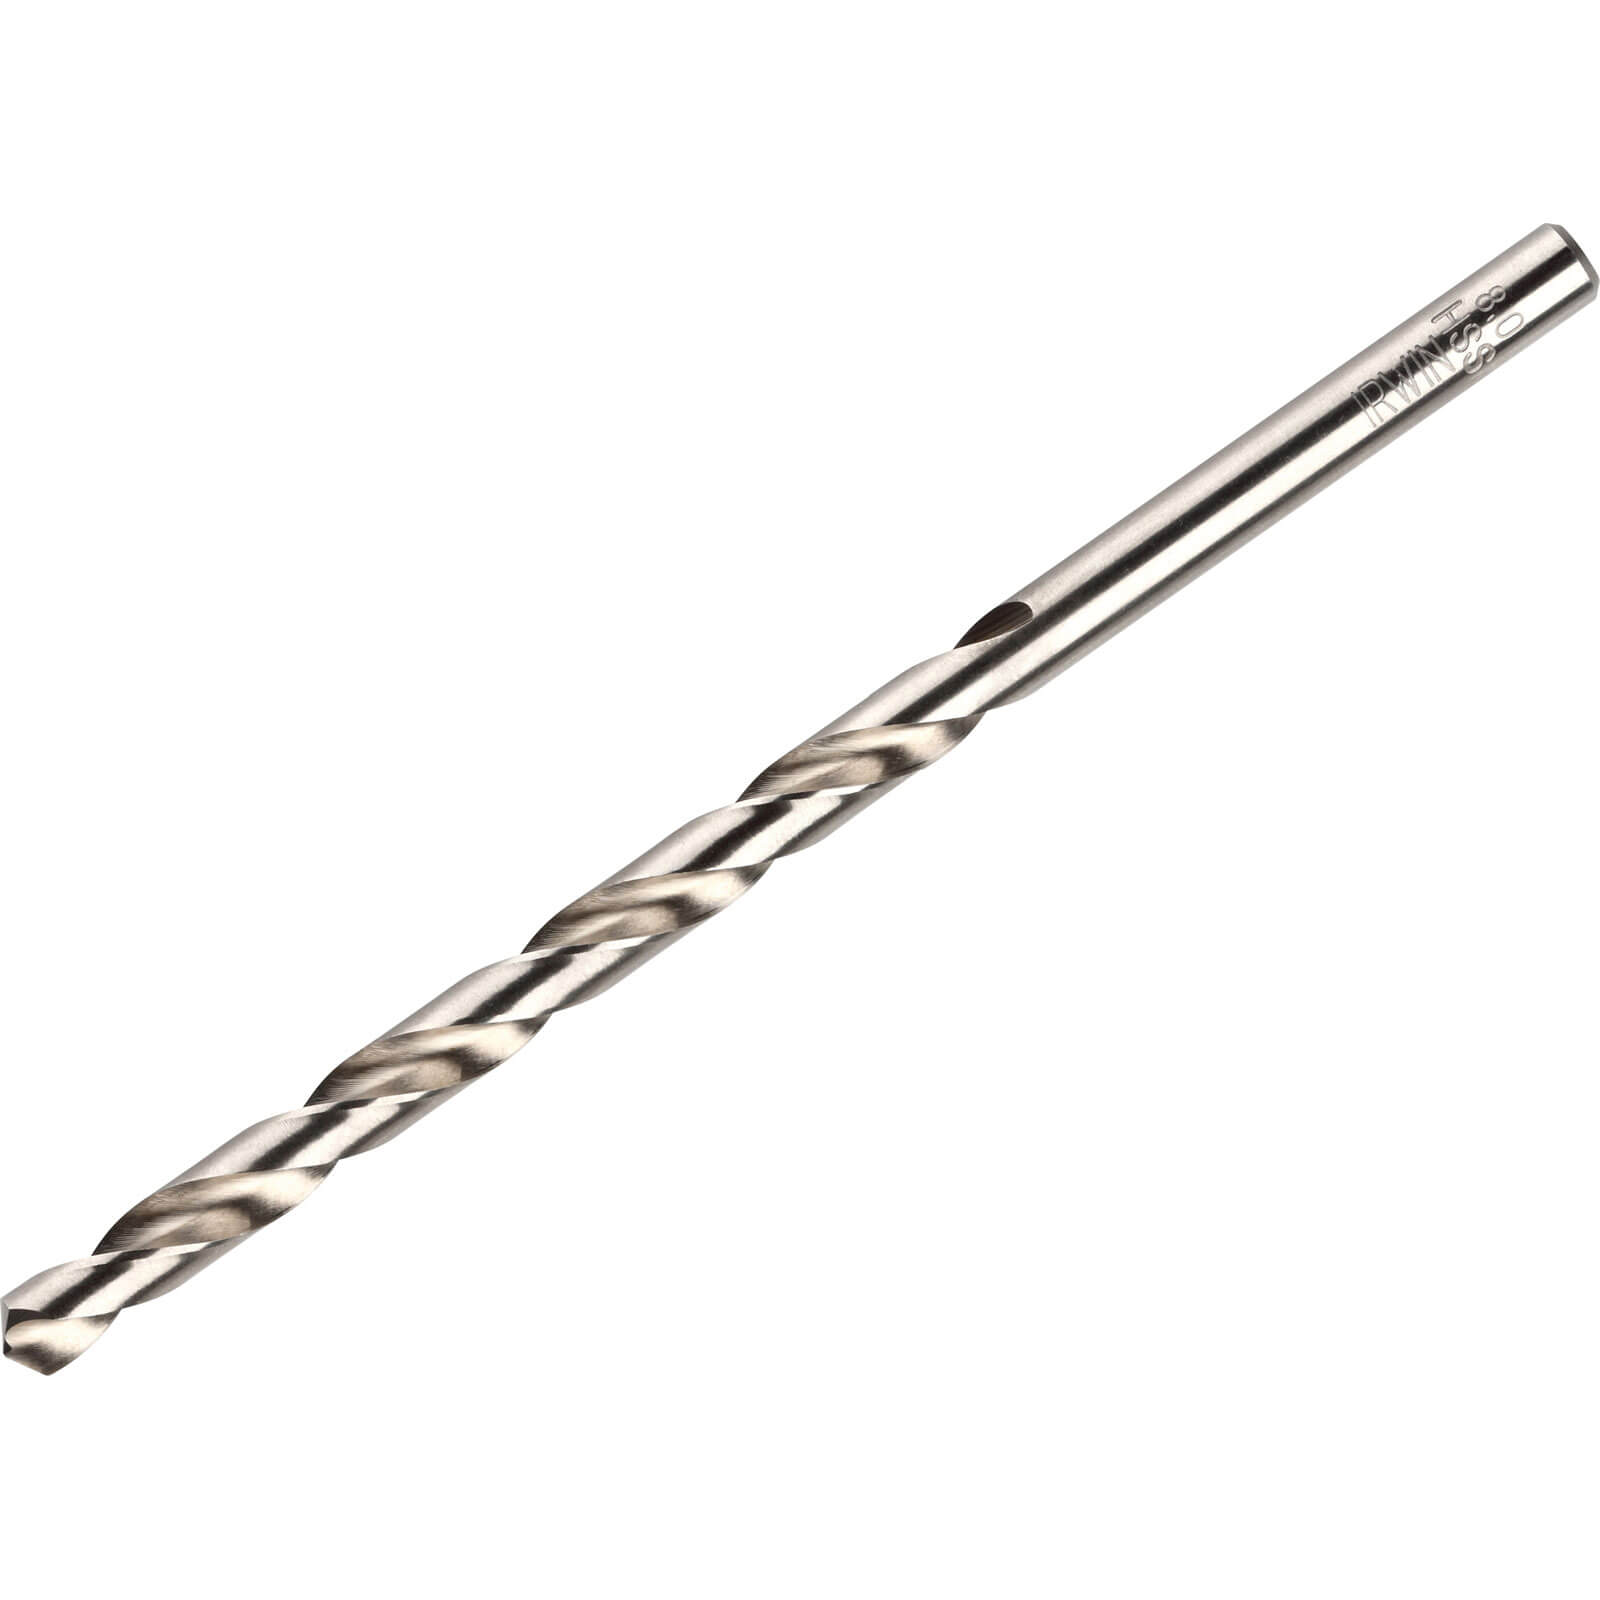 Photo of Irwin Hss Pro Drill Bits 7.5mm Pack Of 1